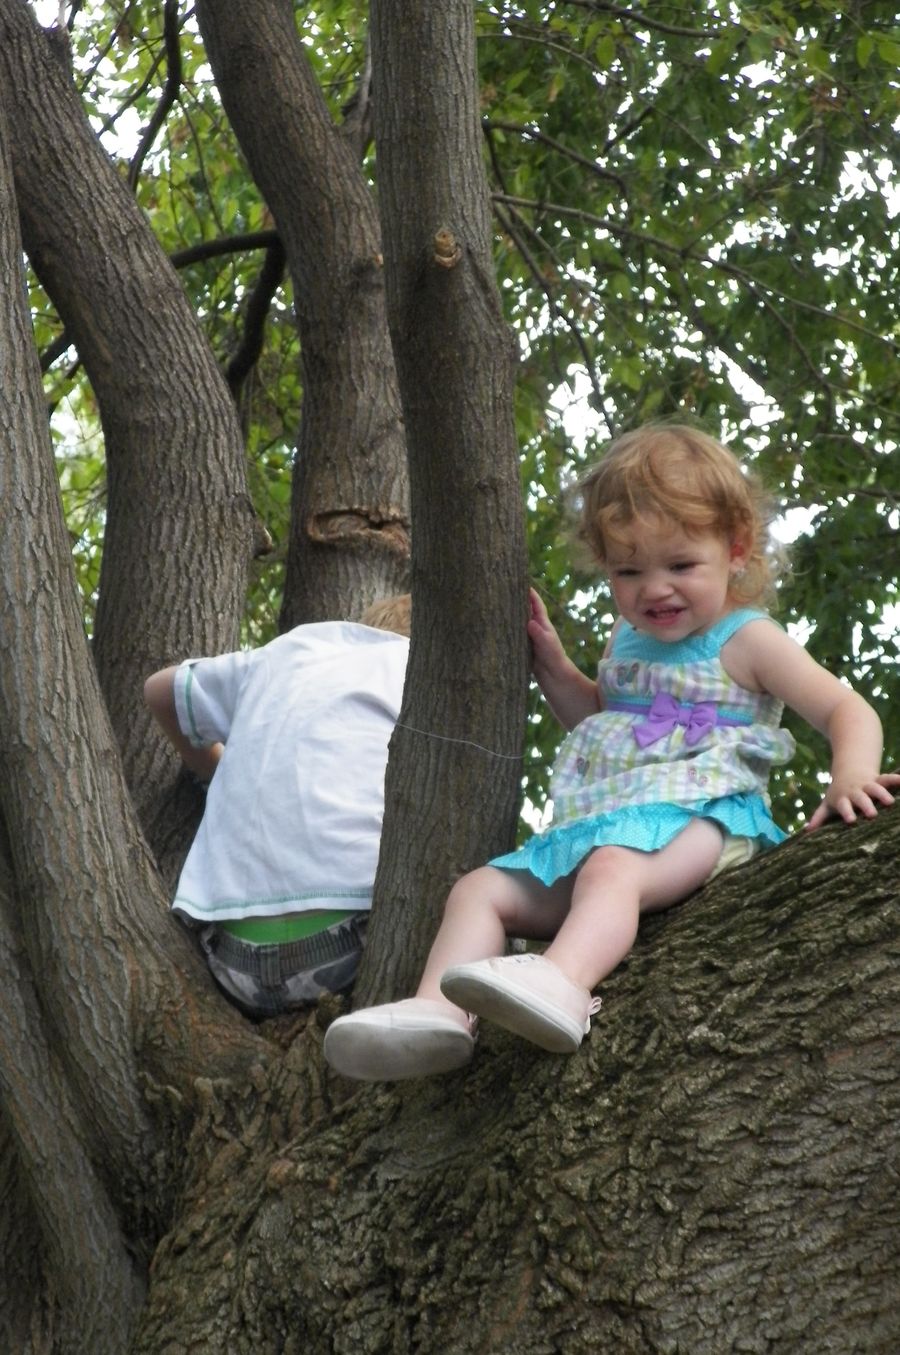 Hanging in the tree with her brother